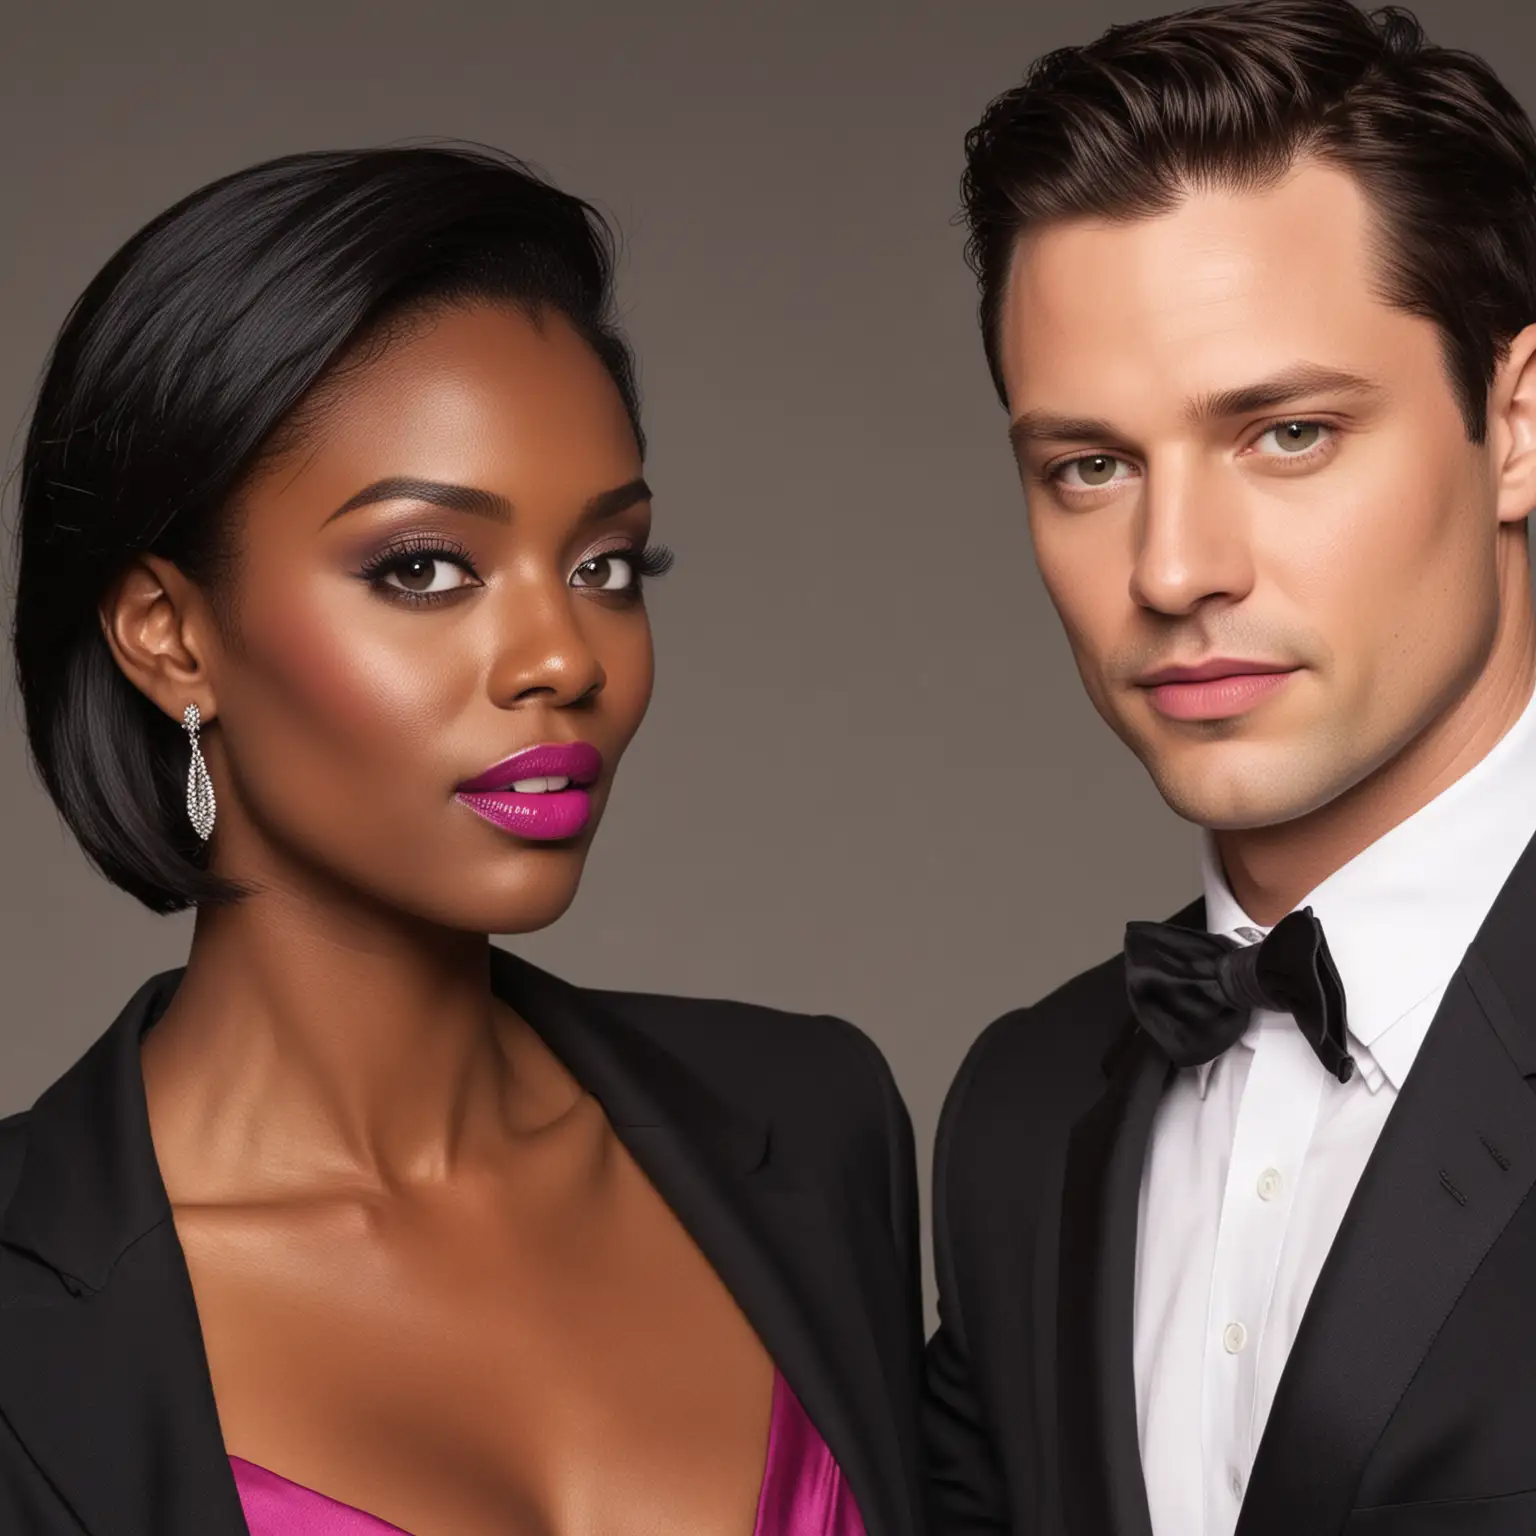 Gorgeous white male model in his early forties. He has dark short hair. He is wearing a suit . He is facing a beautiful black woman model and she is facing him. She is wearing a fuchsia dress with matching lipstick. She has long black hair. 